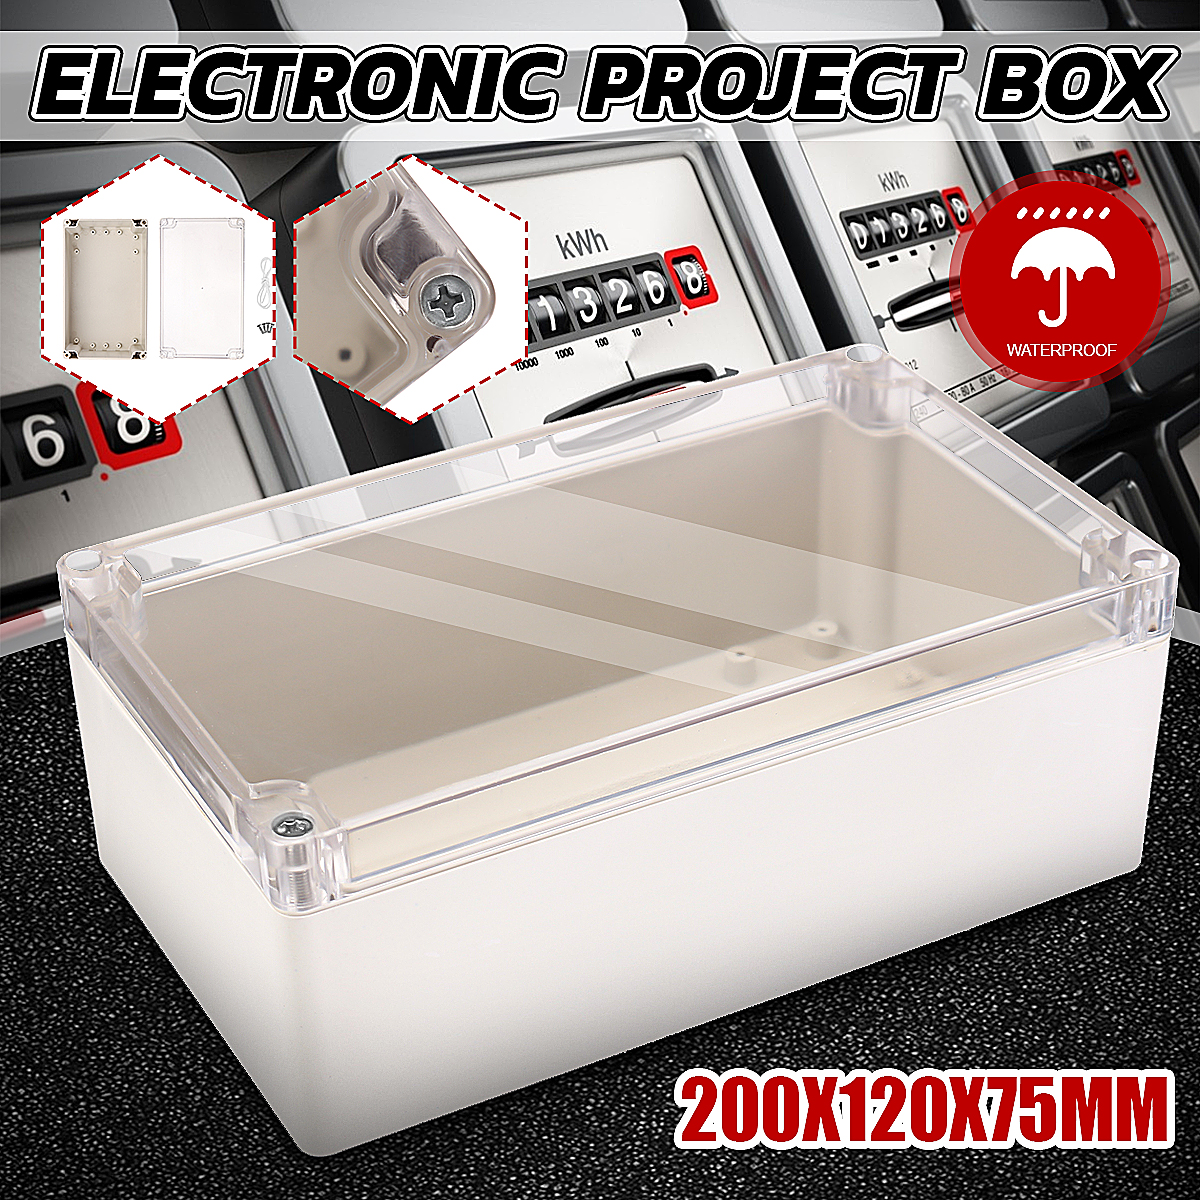 Plastic-Waterproof-Electronic-Project-Box-Clear-Cover-Electronic-Project-Case-20012075mm-1595734-2